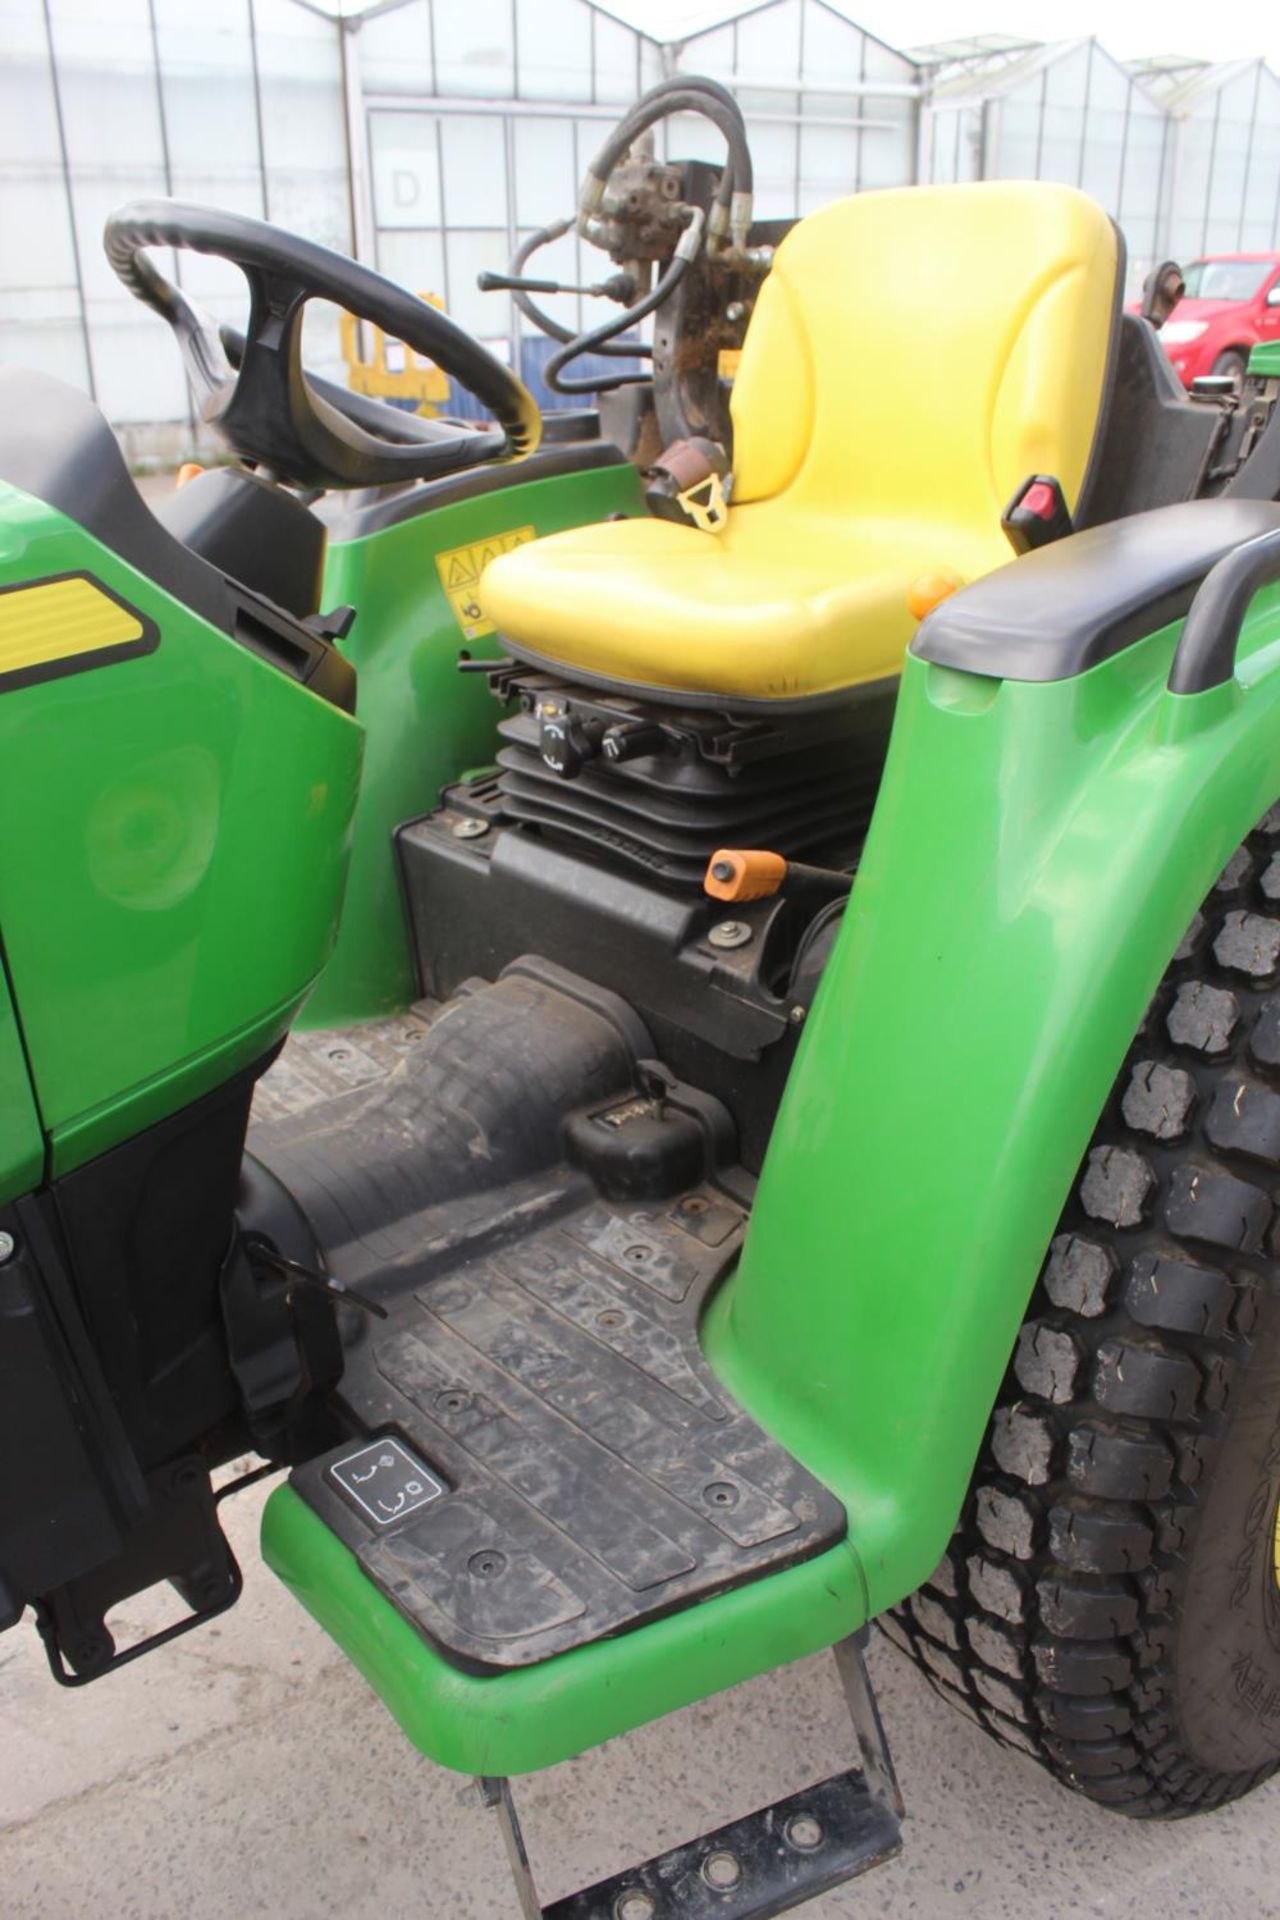 JOHN DEERE 3038E COMPACT TRACTOR 2021 617 HOURS APPROX ONE OWNER FROM NEW USER MANUAL FULL TER - Image 7 of 8